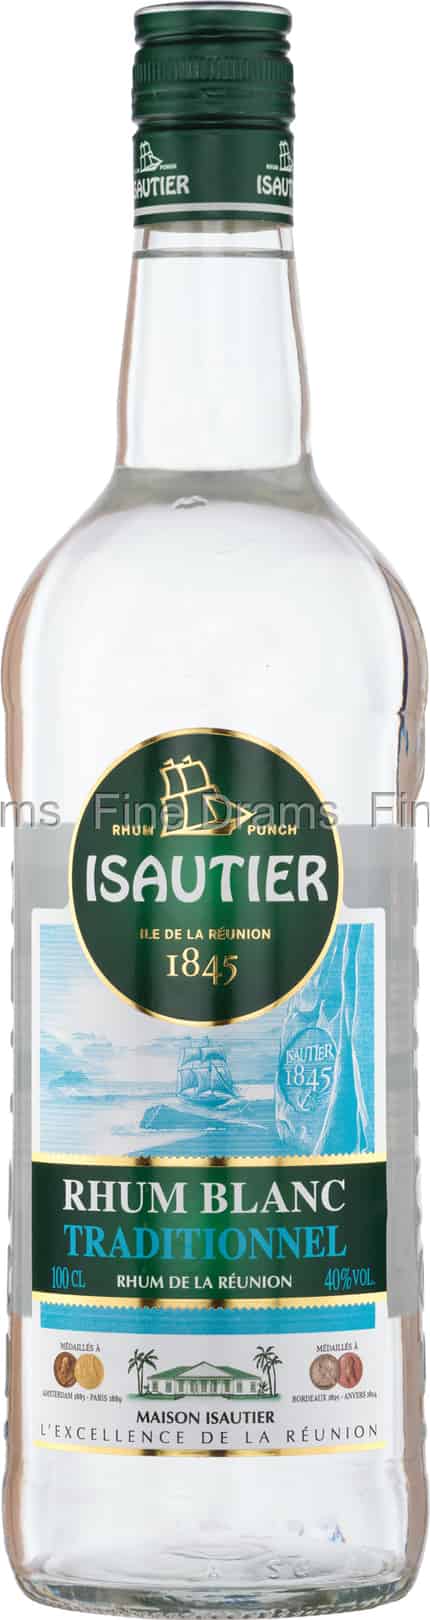 Isautier Blanc Traditionnel 40 - Cubi BIB Bag-In-Box 3 litres